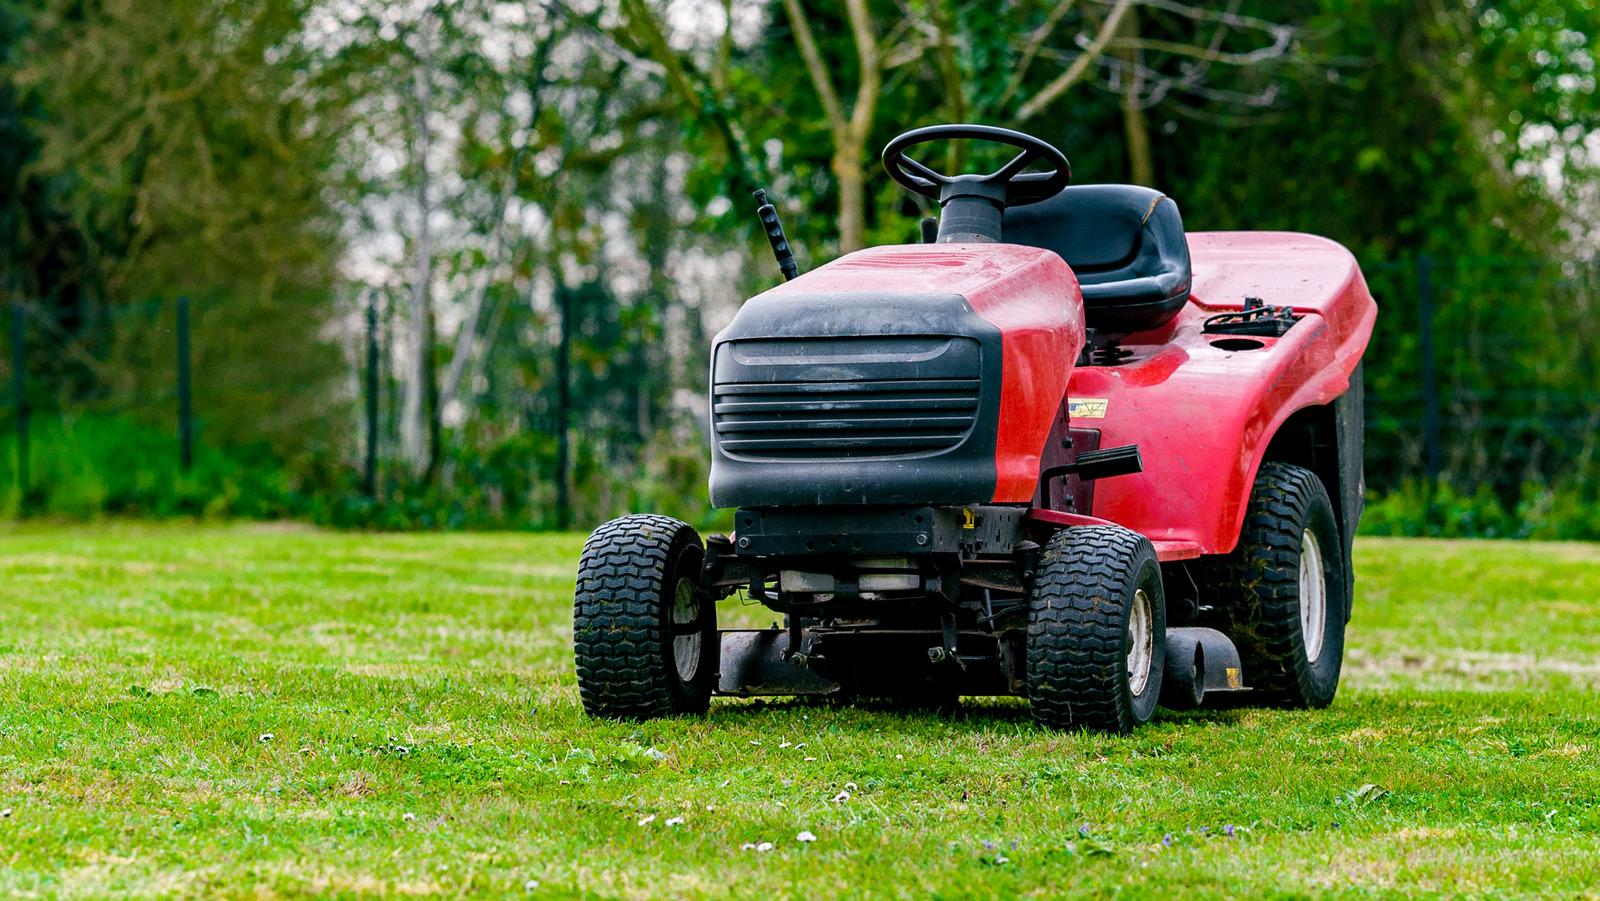 How Much Gasoline Does A Riding Lawn Mower Use?